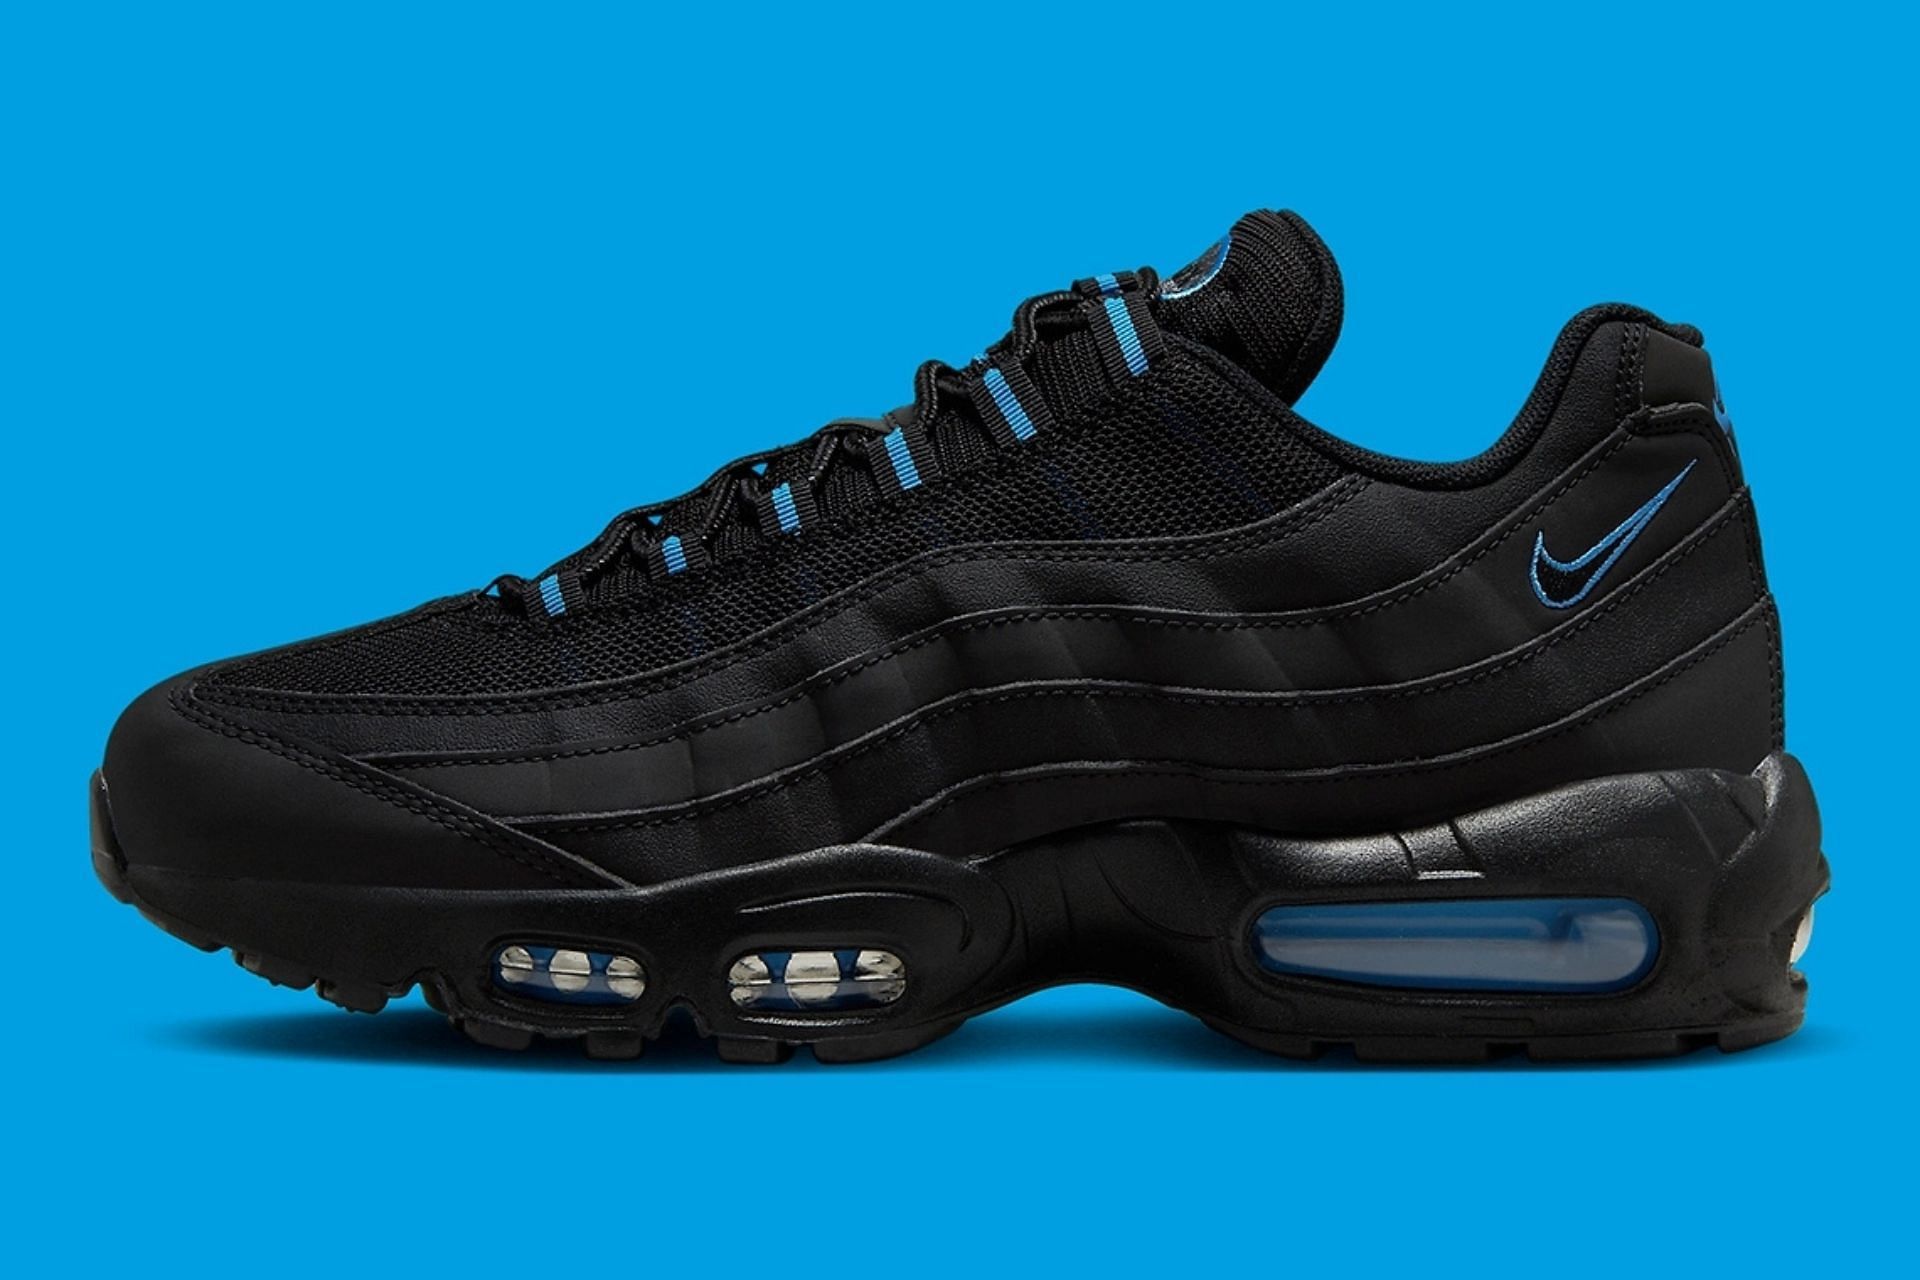 plantageejer Konklusion vil beslutte Air Max 1: Nike Air Max 95 "Black/University Blue" shoes: Where to buy,  price, and more details explored